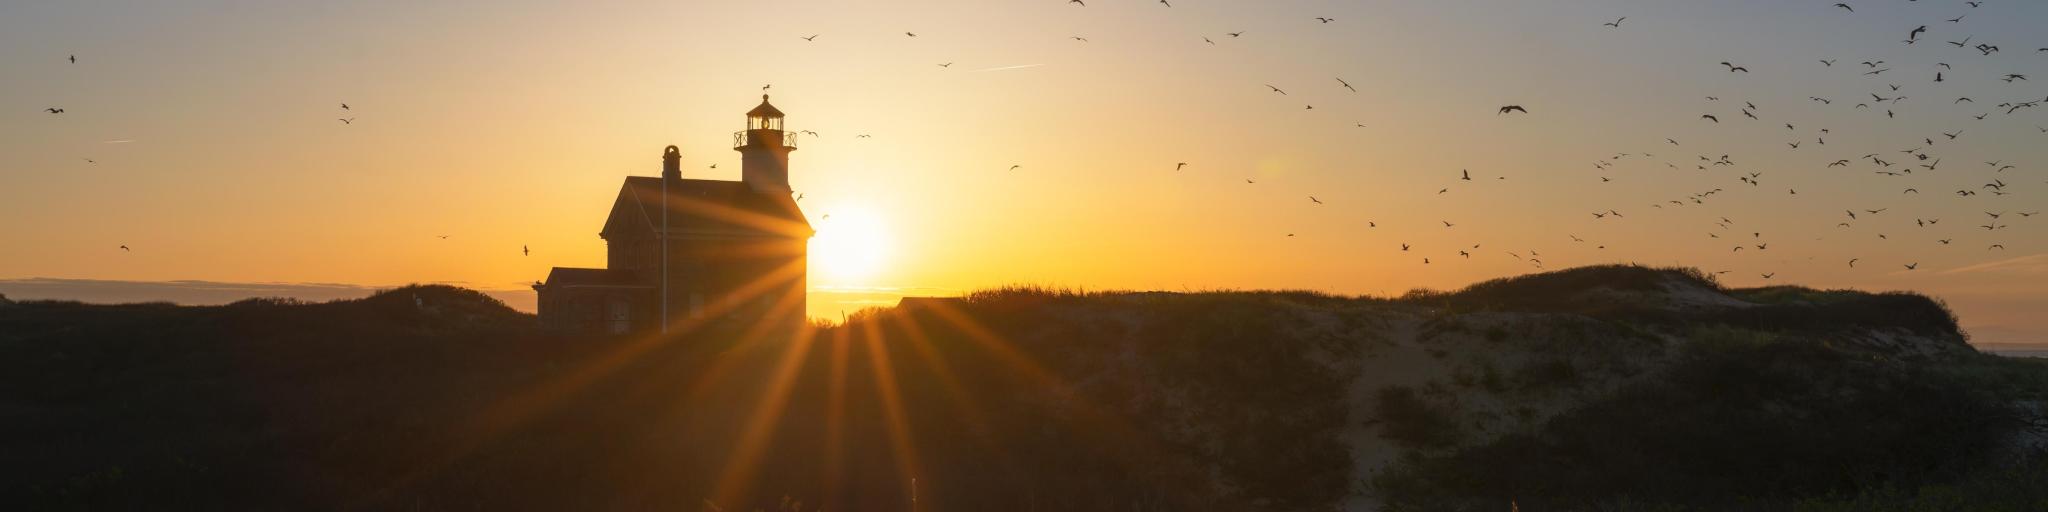 Scenic silhouette of the North Lighthouse during sunset on Block Island